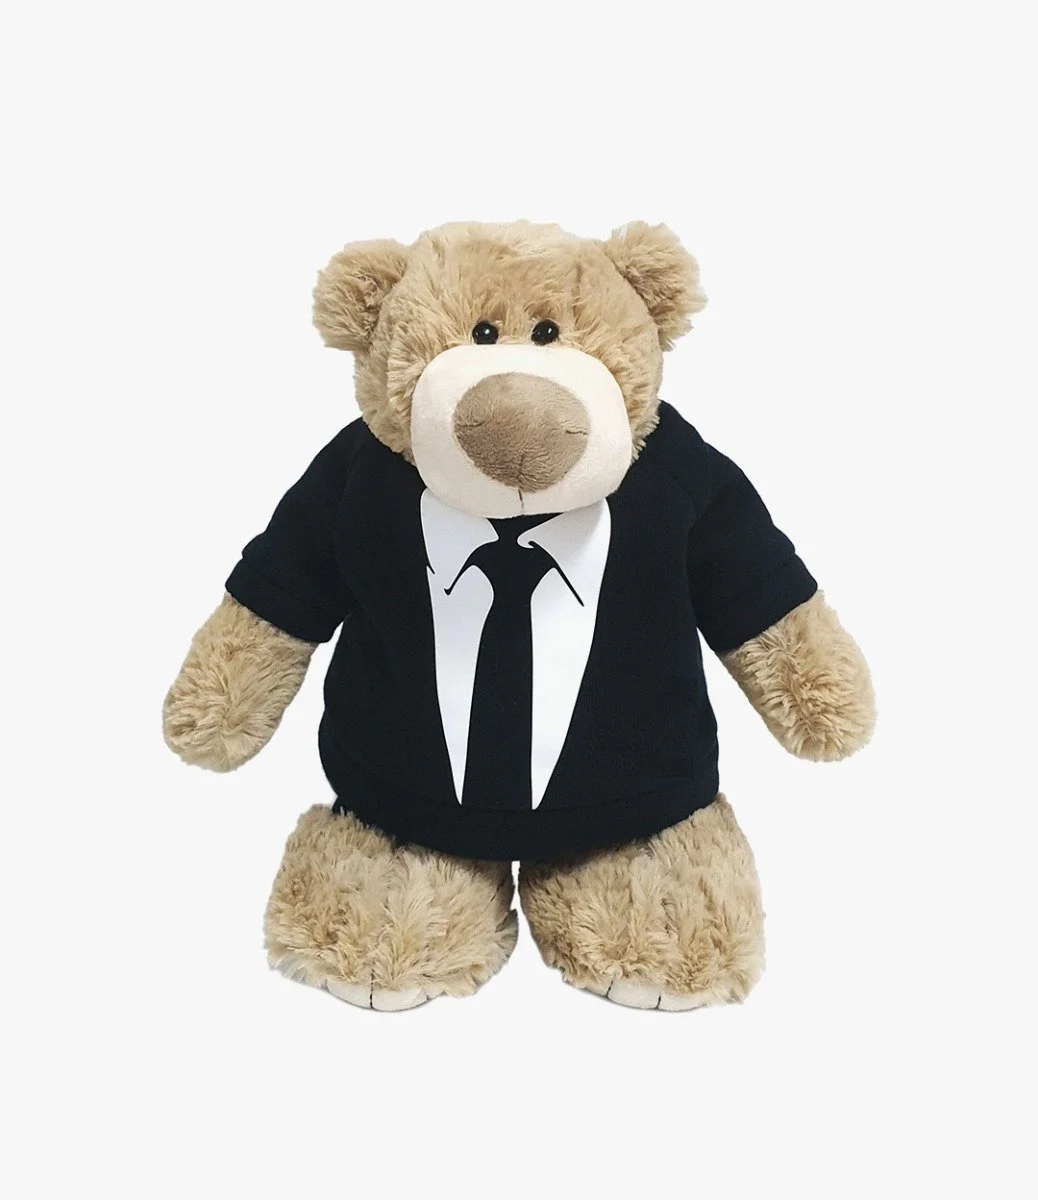 Mascot Bear with trendy Black Suit 28cm by Fay Lawson